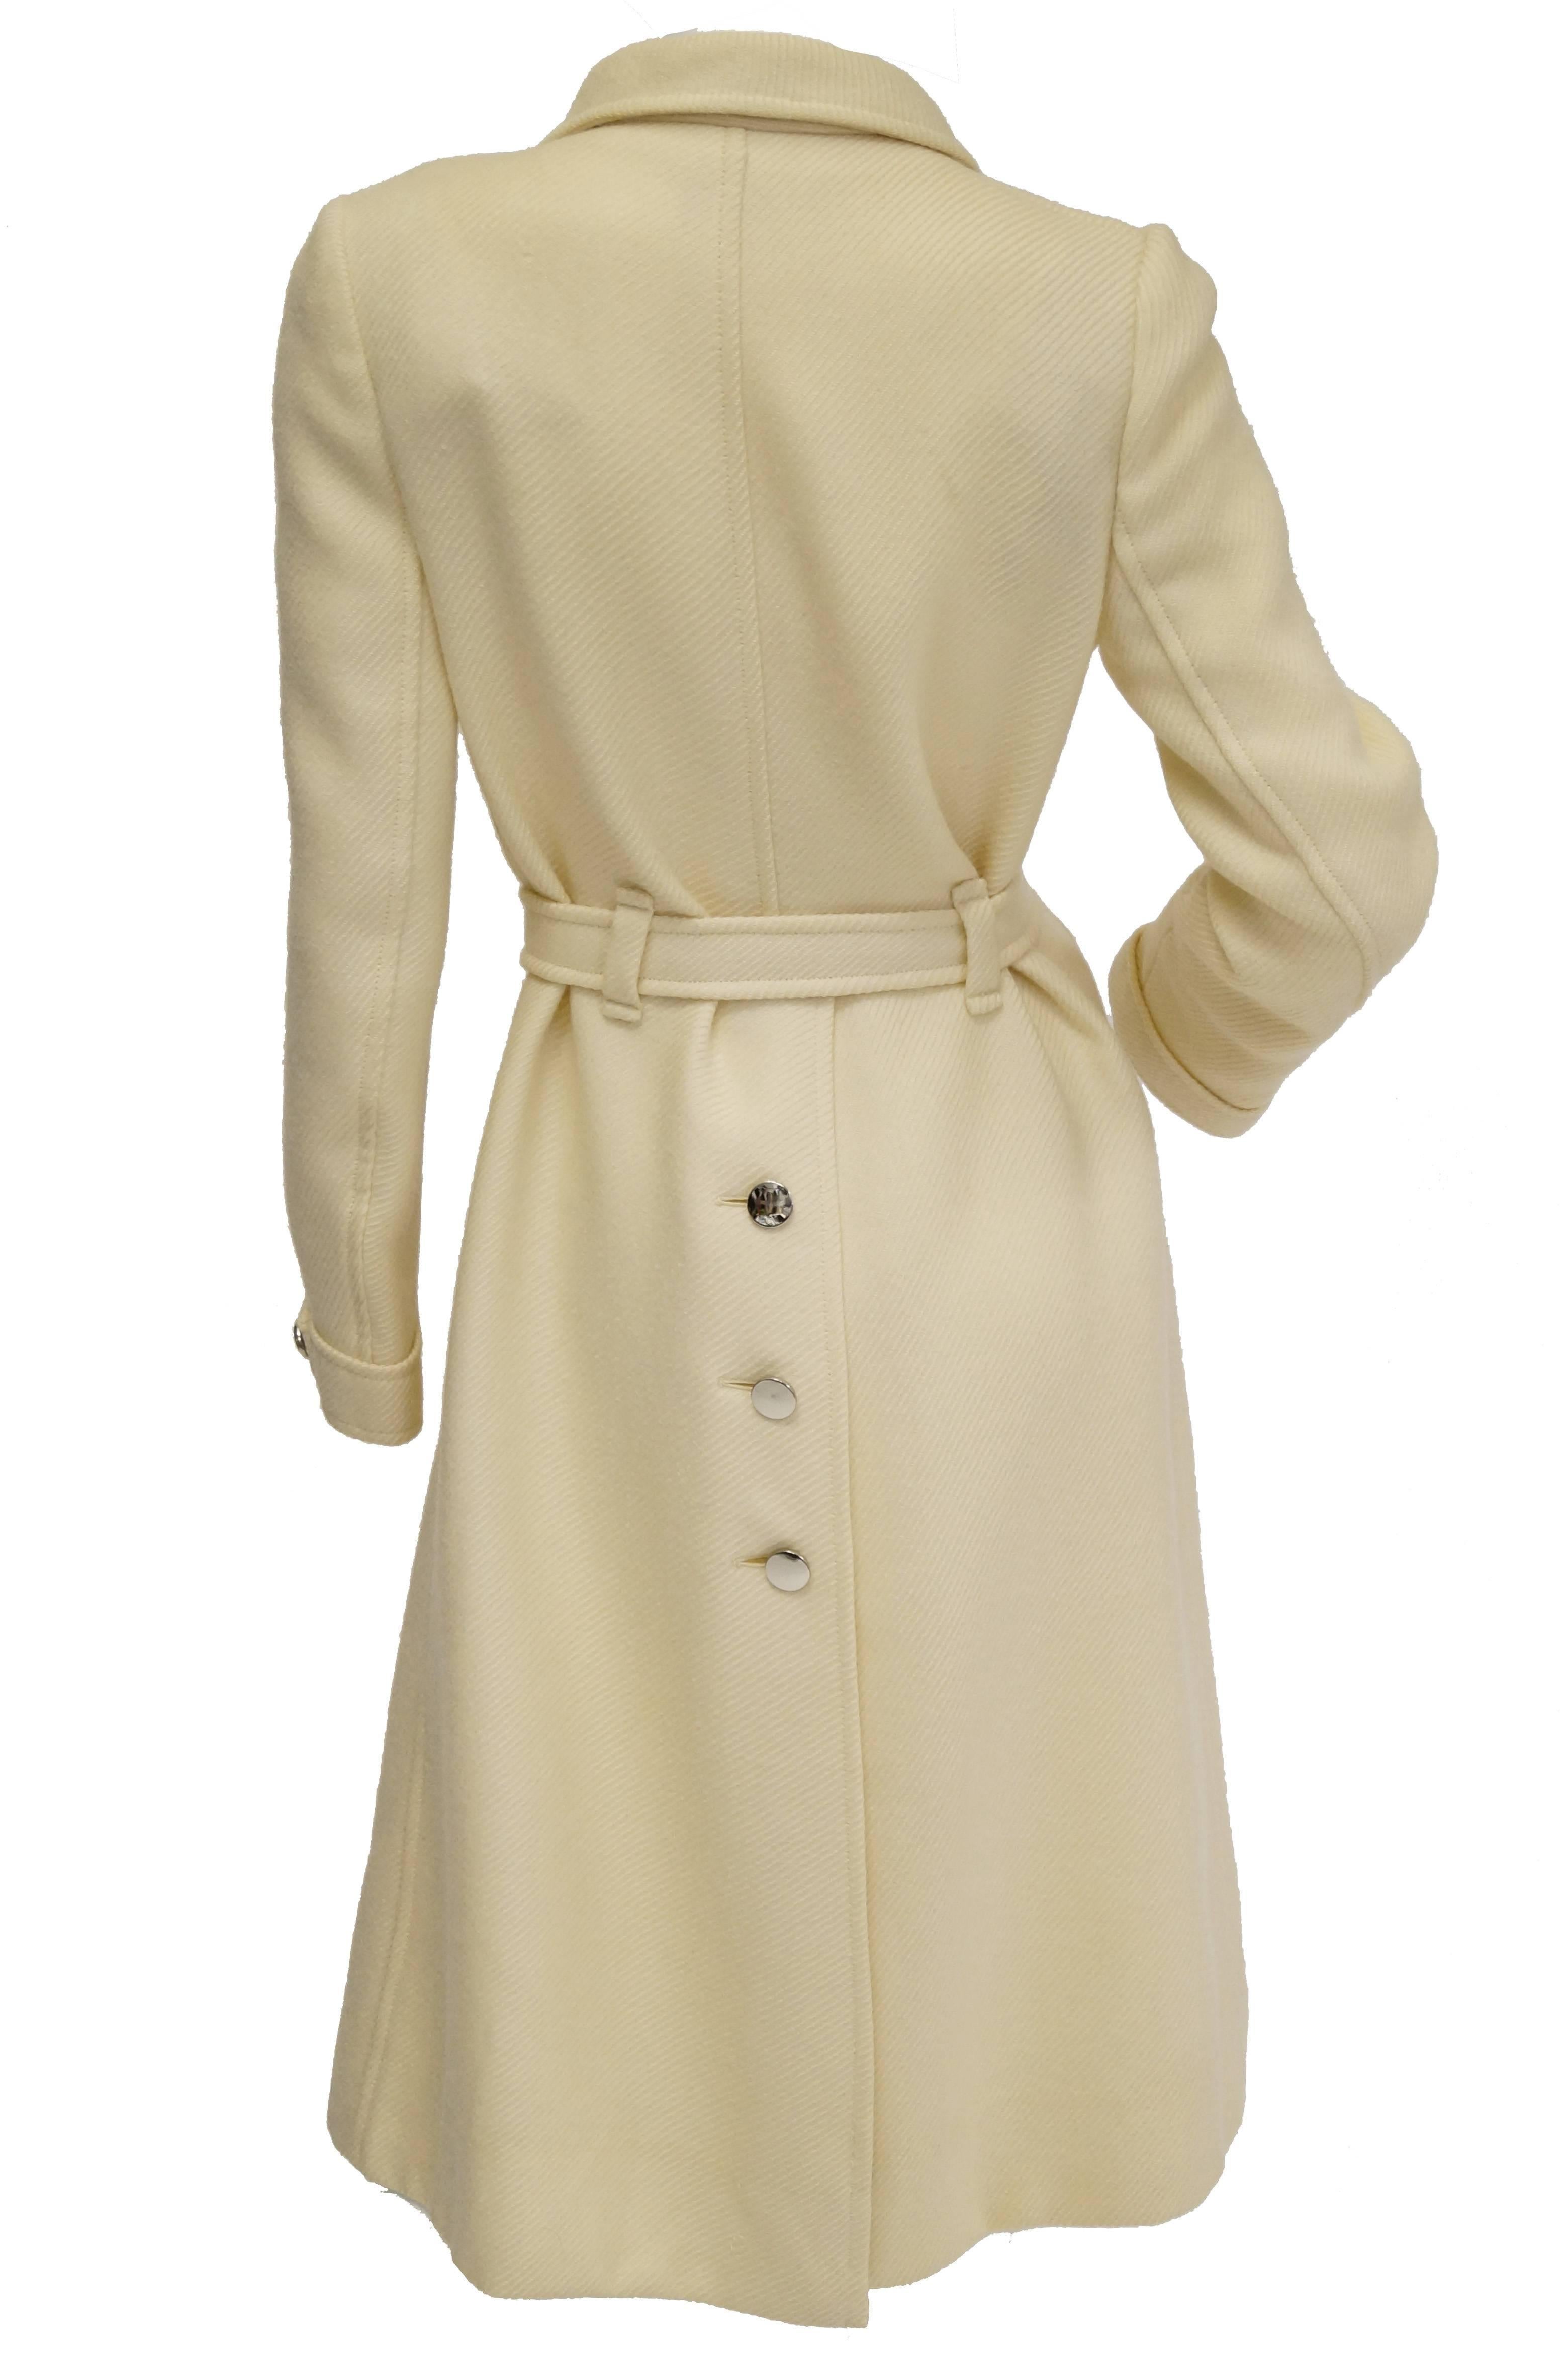  1960s Courreges Hyperbole Cream Wool Coat with Accent Zippers and Buttons For Sale 2